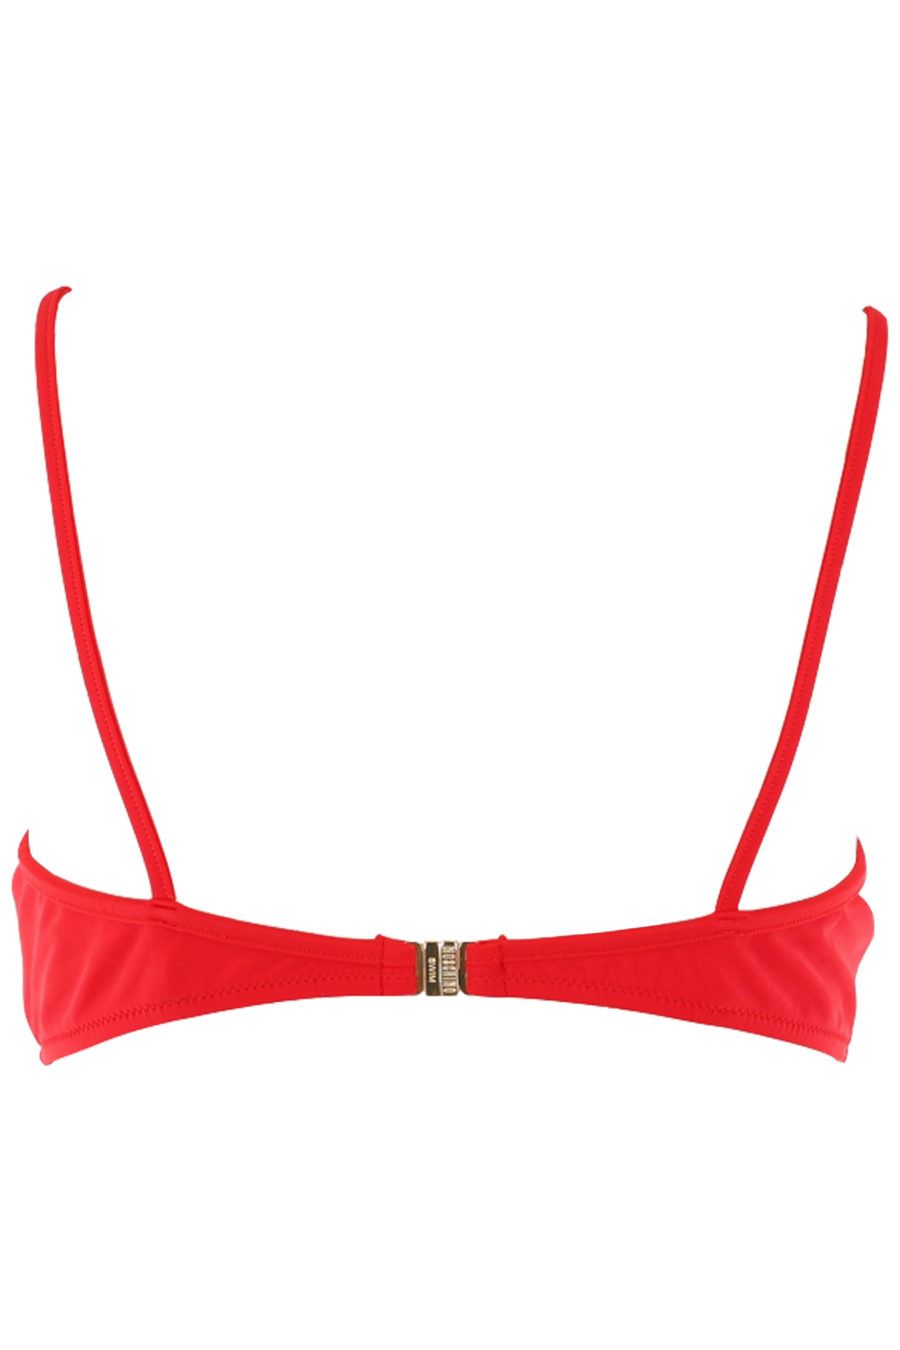 Straight bikini top red with black double question logo - IMG 0767